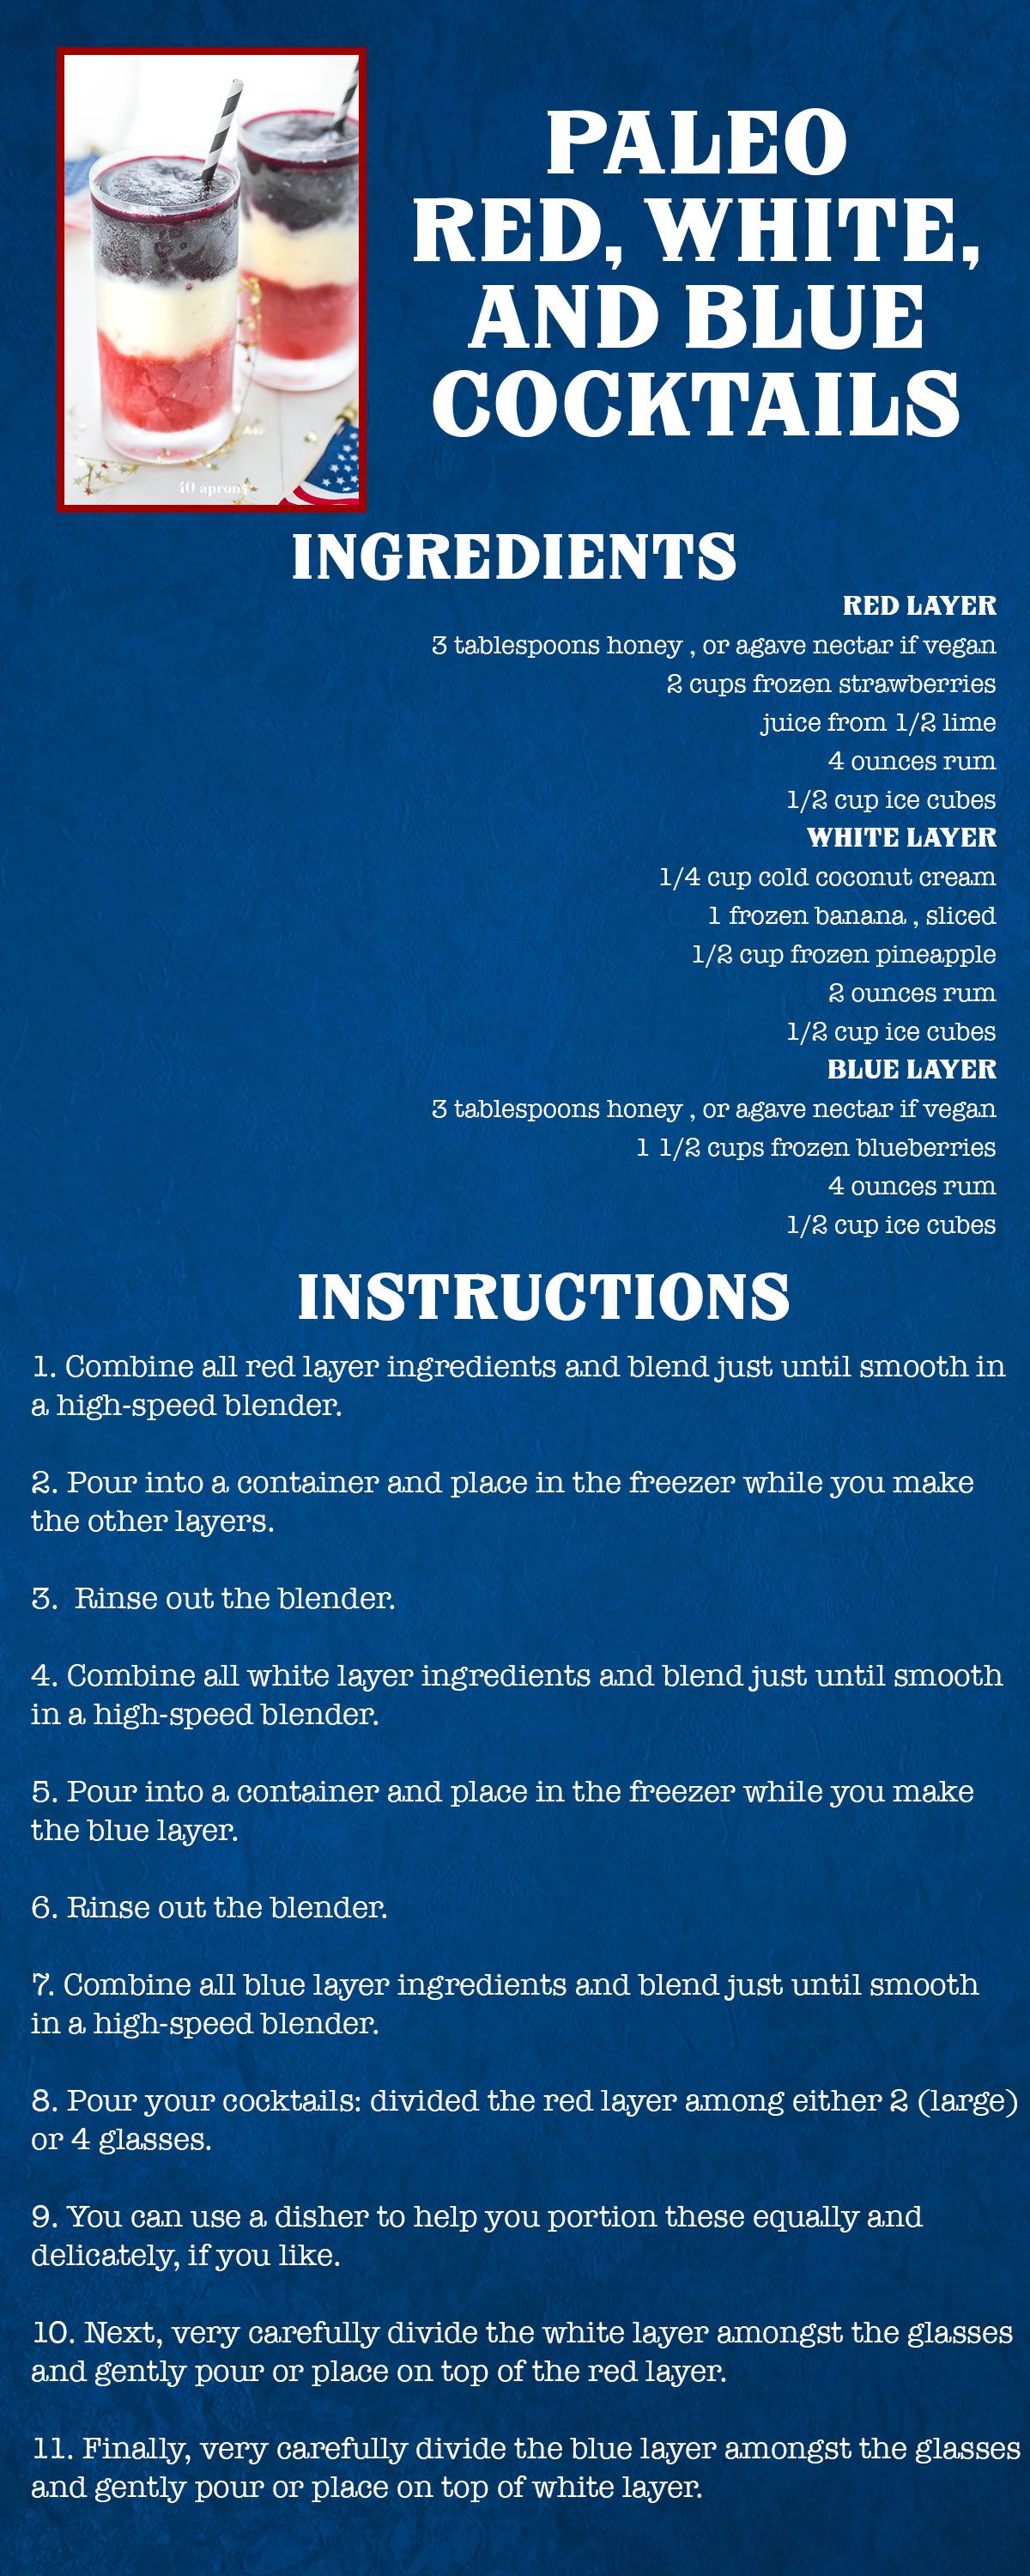 Paleo Red, White, and Blue Cocktails Recipe Card